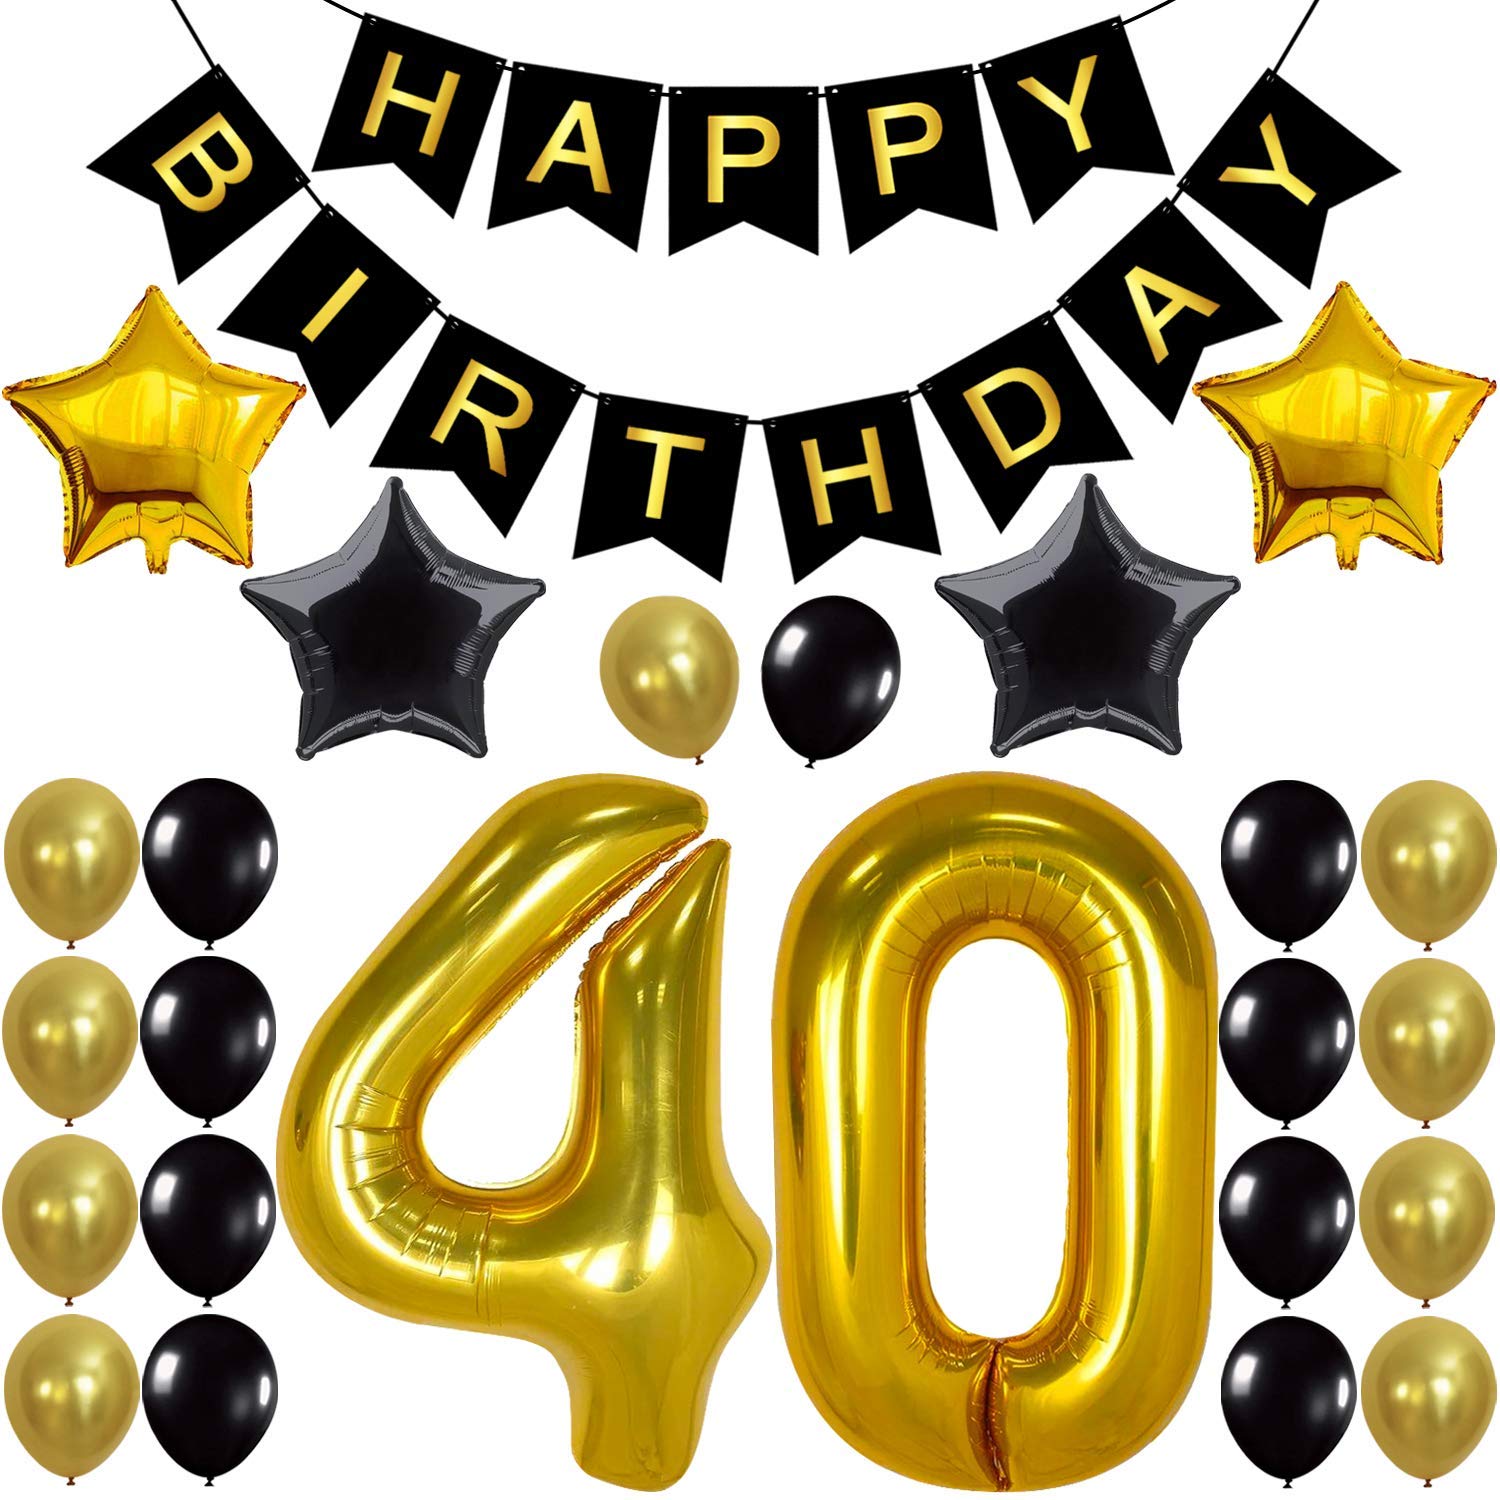 MALE-PARTY-FOIL BALLOON DISPLAY-TABLE CENTREPIECE-BANNER 40th  BIRTHDAY AGE 40